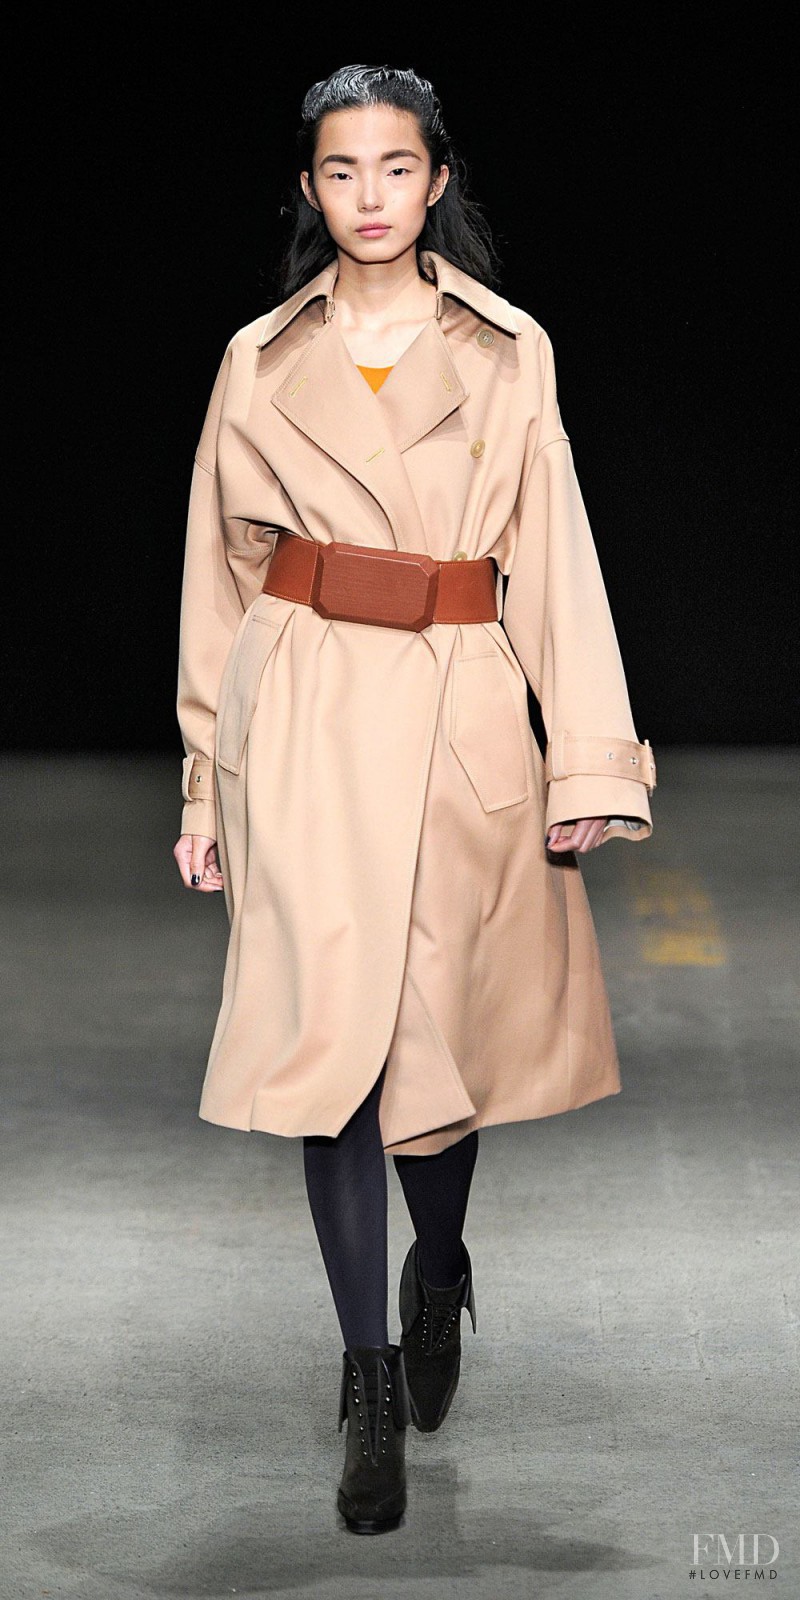 Xiao Wen Ju featured in  the 3.1 Phillip Lim fashion show for Autumn/Winter 2014